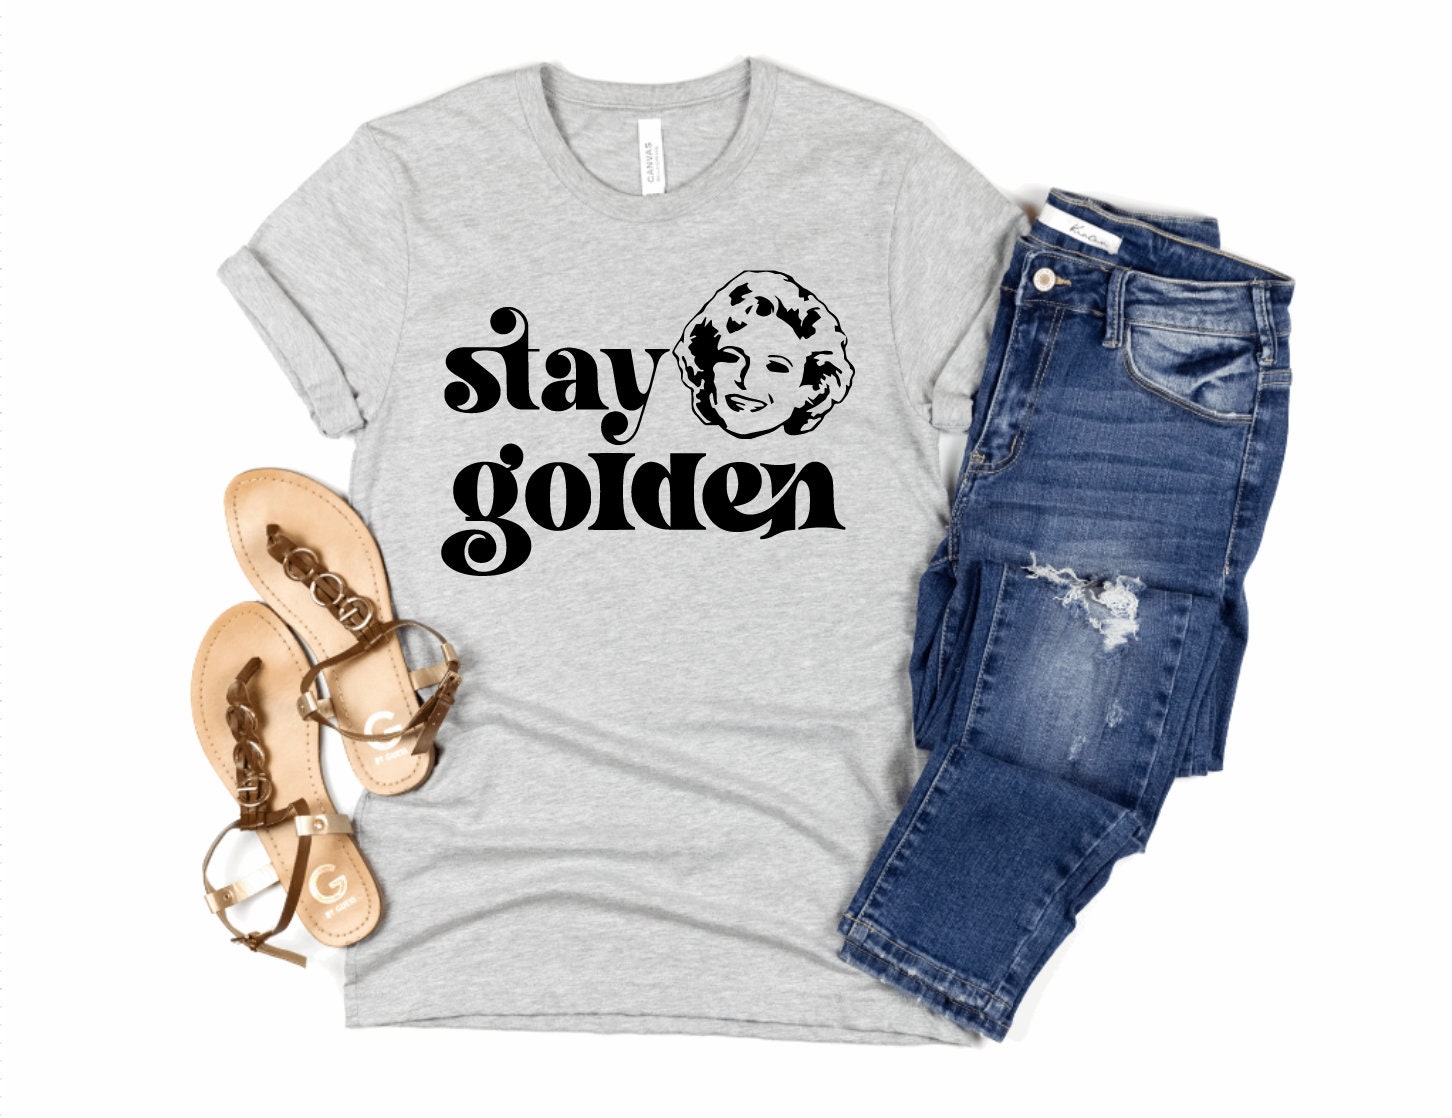 Discover Stay Golden Betty White Crewneck Sweatshirt / Stay Golden Crewneck Sweatshirt / Crewneck Pullover Sweater / Stay Golden Valentine's Day